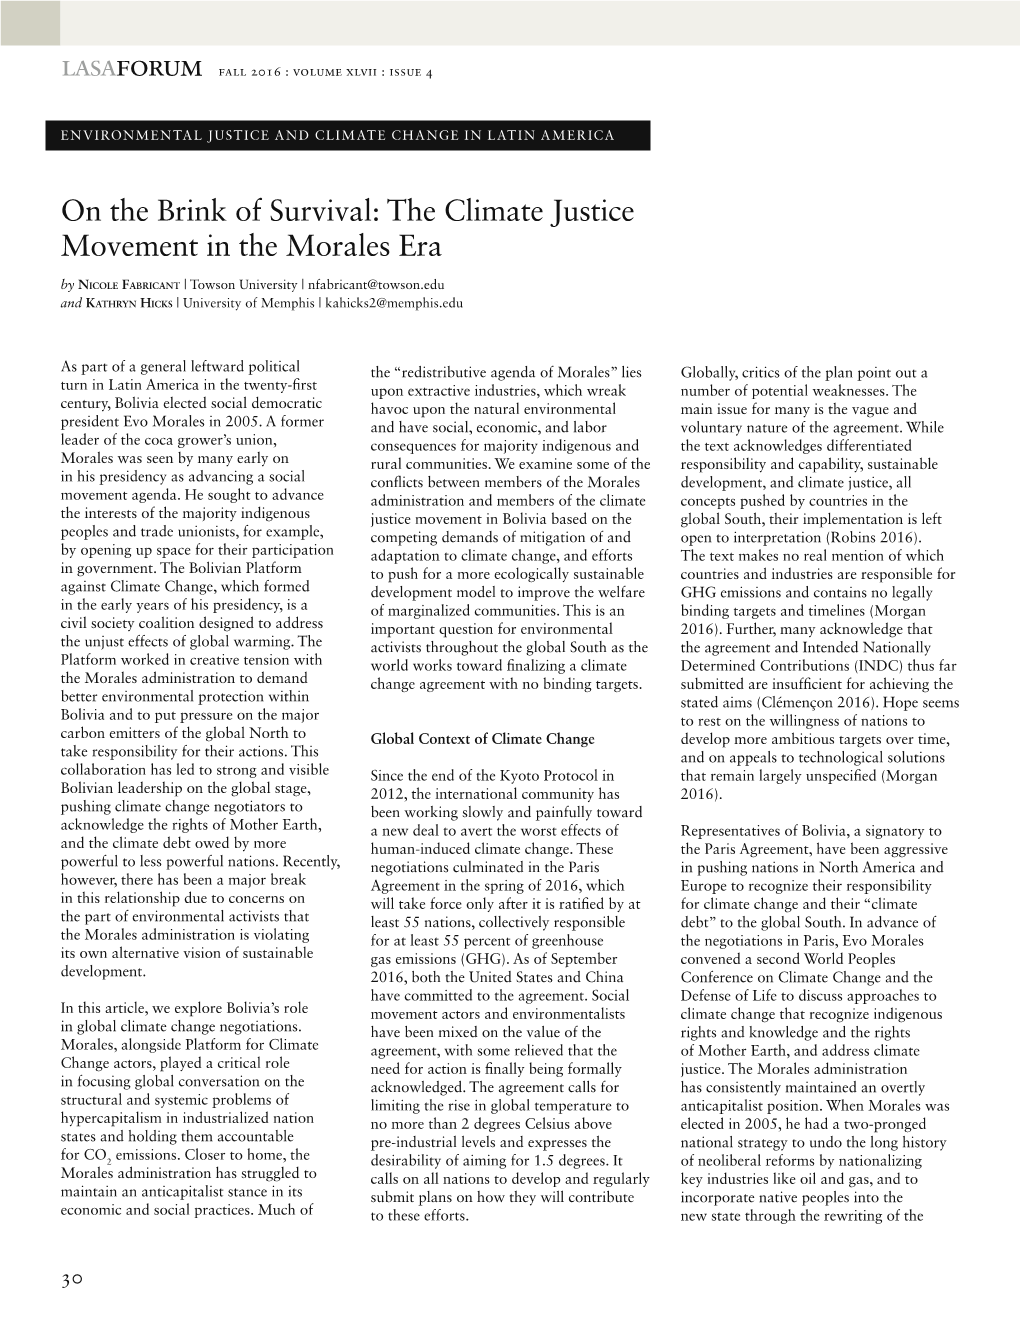 On the Brink of Survival: the Climate Justice Movement in the Morales